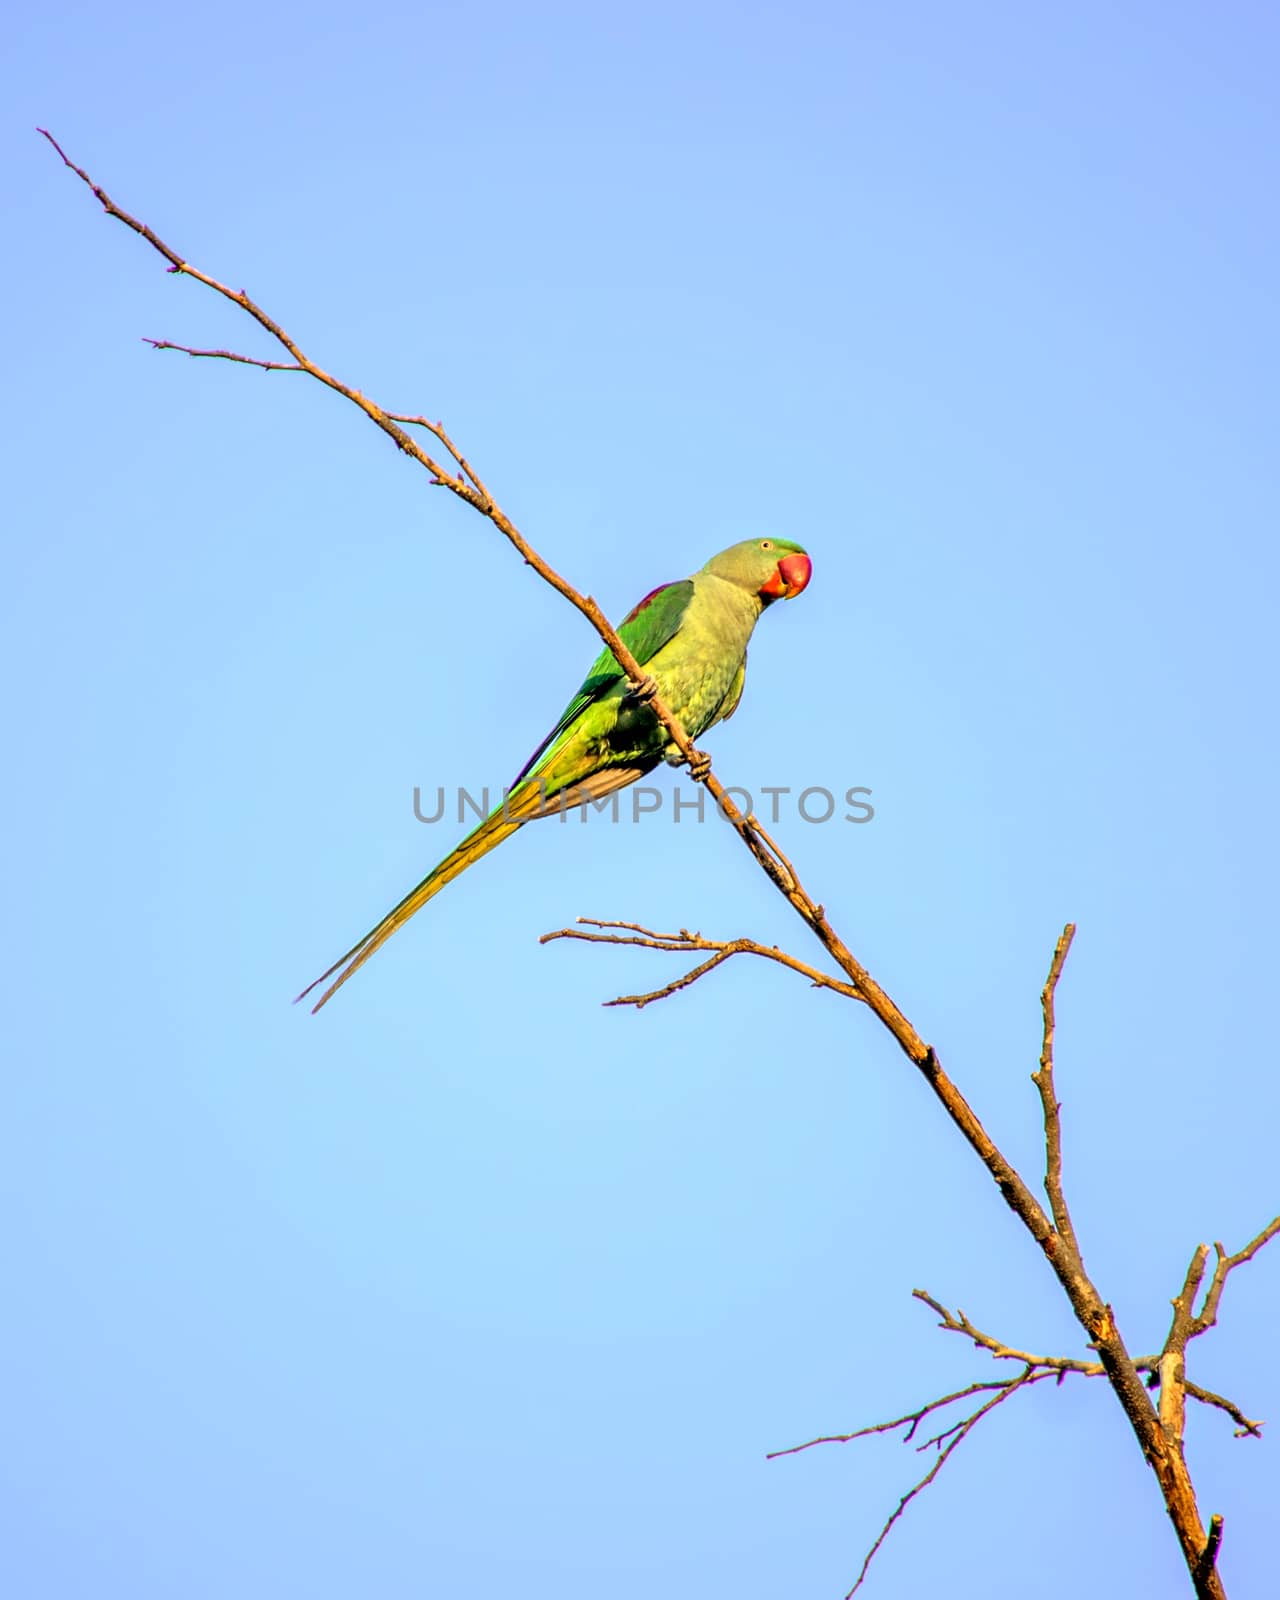 Indian ring-necked parakeet(Psittacula krameri) parrot sitting on dry tree branch with clesar blue sky background.